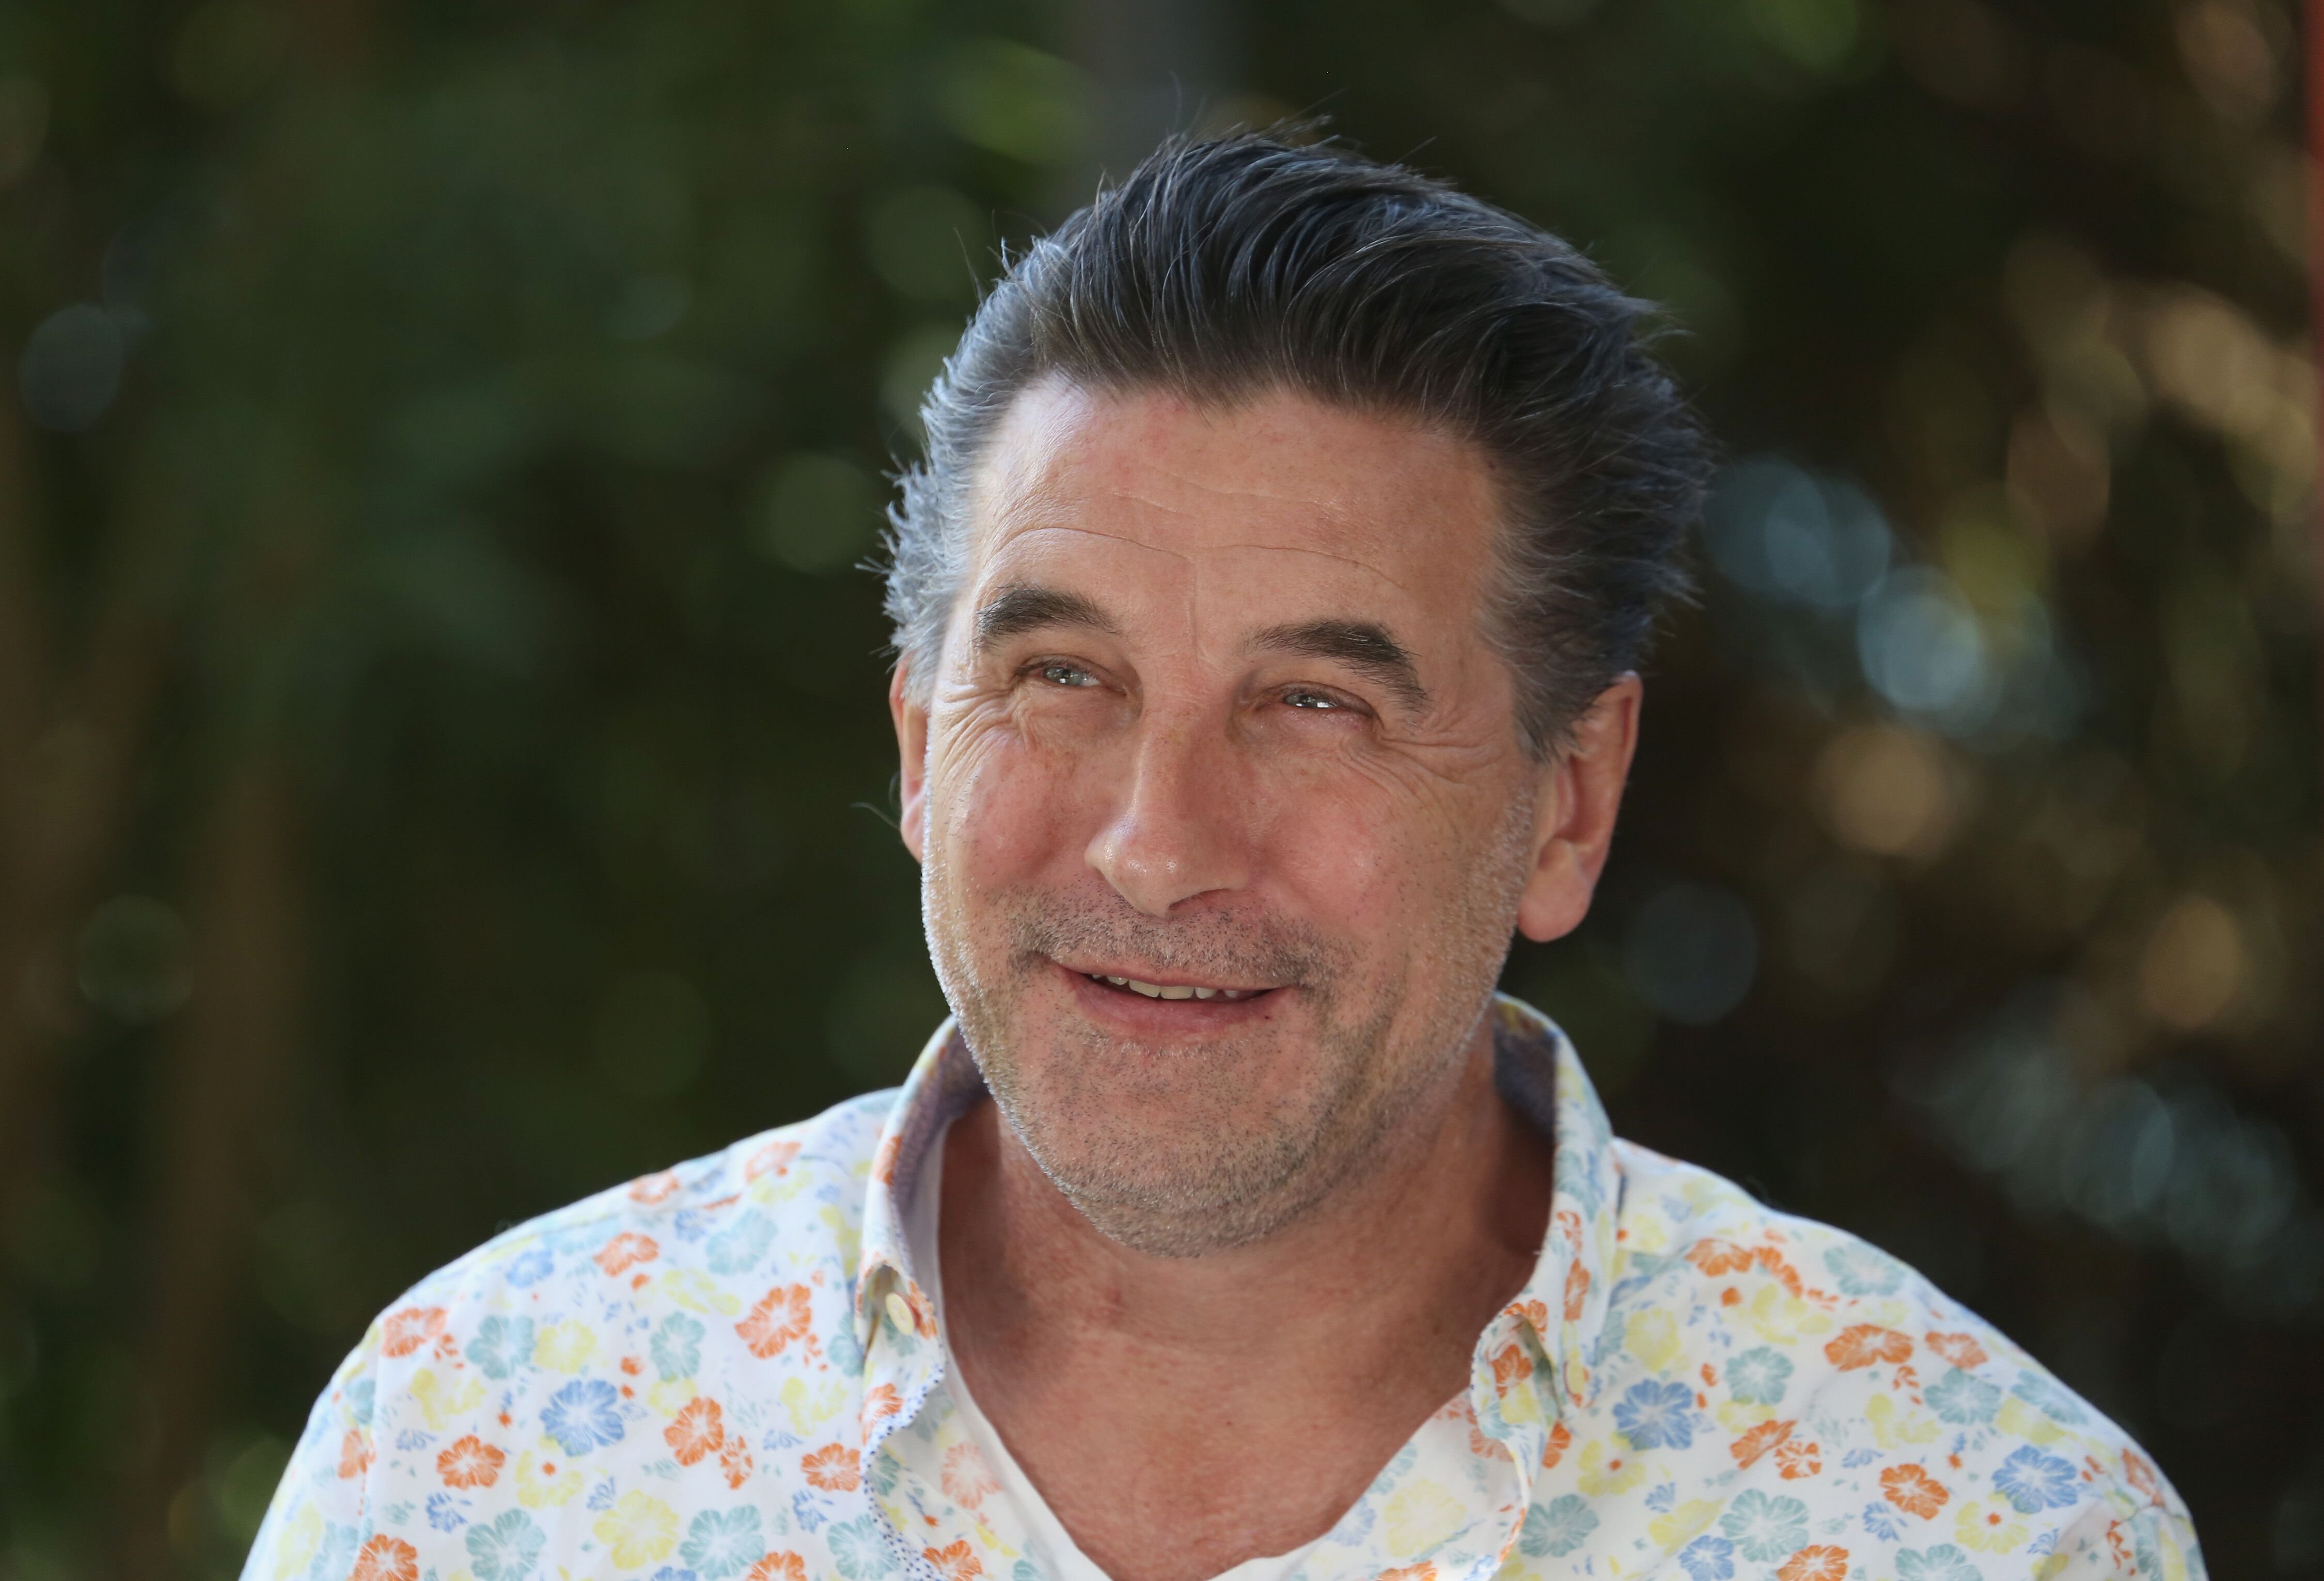 William Baldwin attends the Filming Italy Sardegna Festival 2019 Day 4 Photocall at Forte Village Resort on June 16, 2019 in Cagliari, Italy | Photo: Getty Images